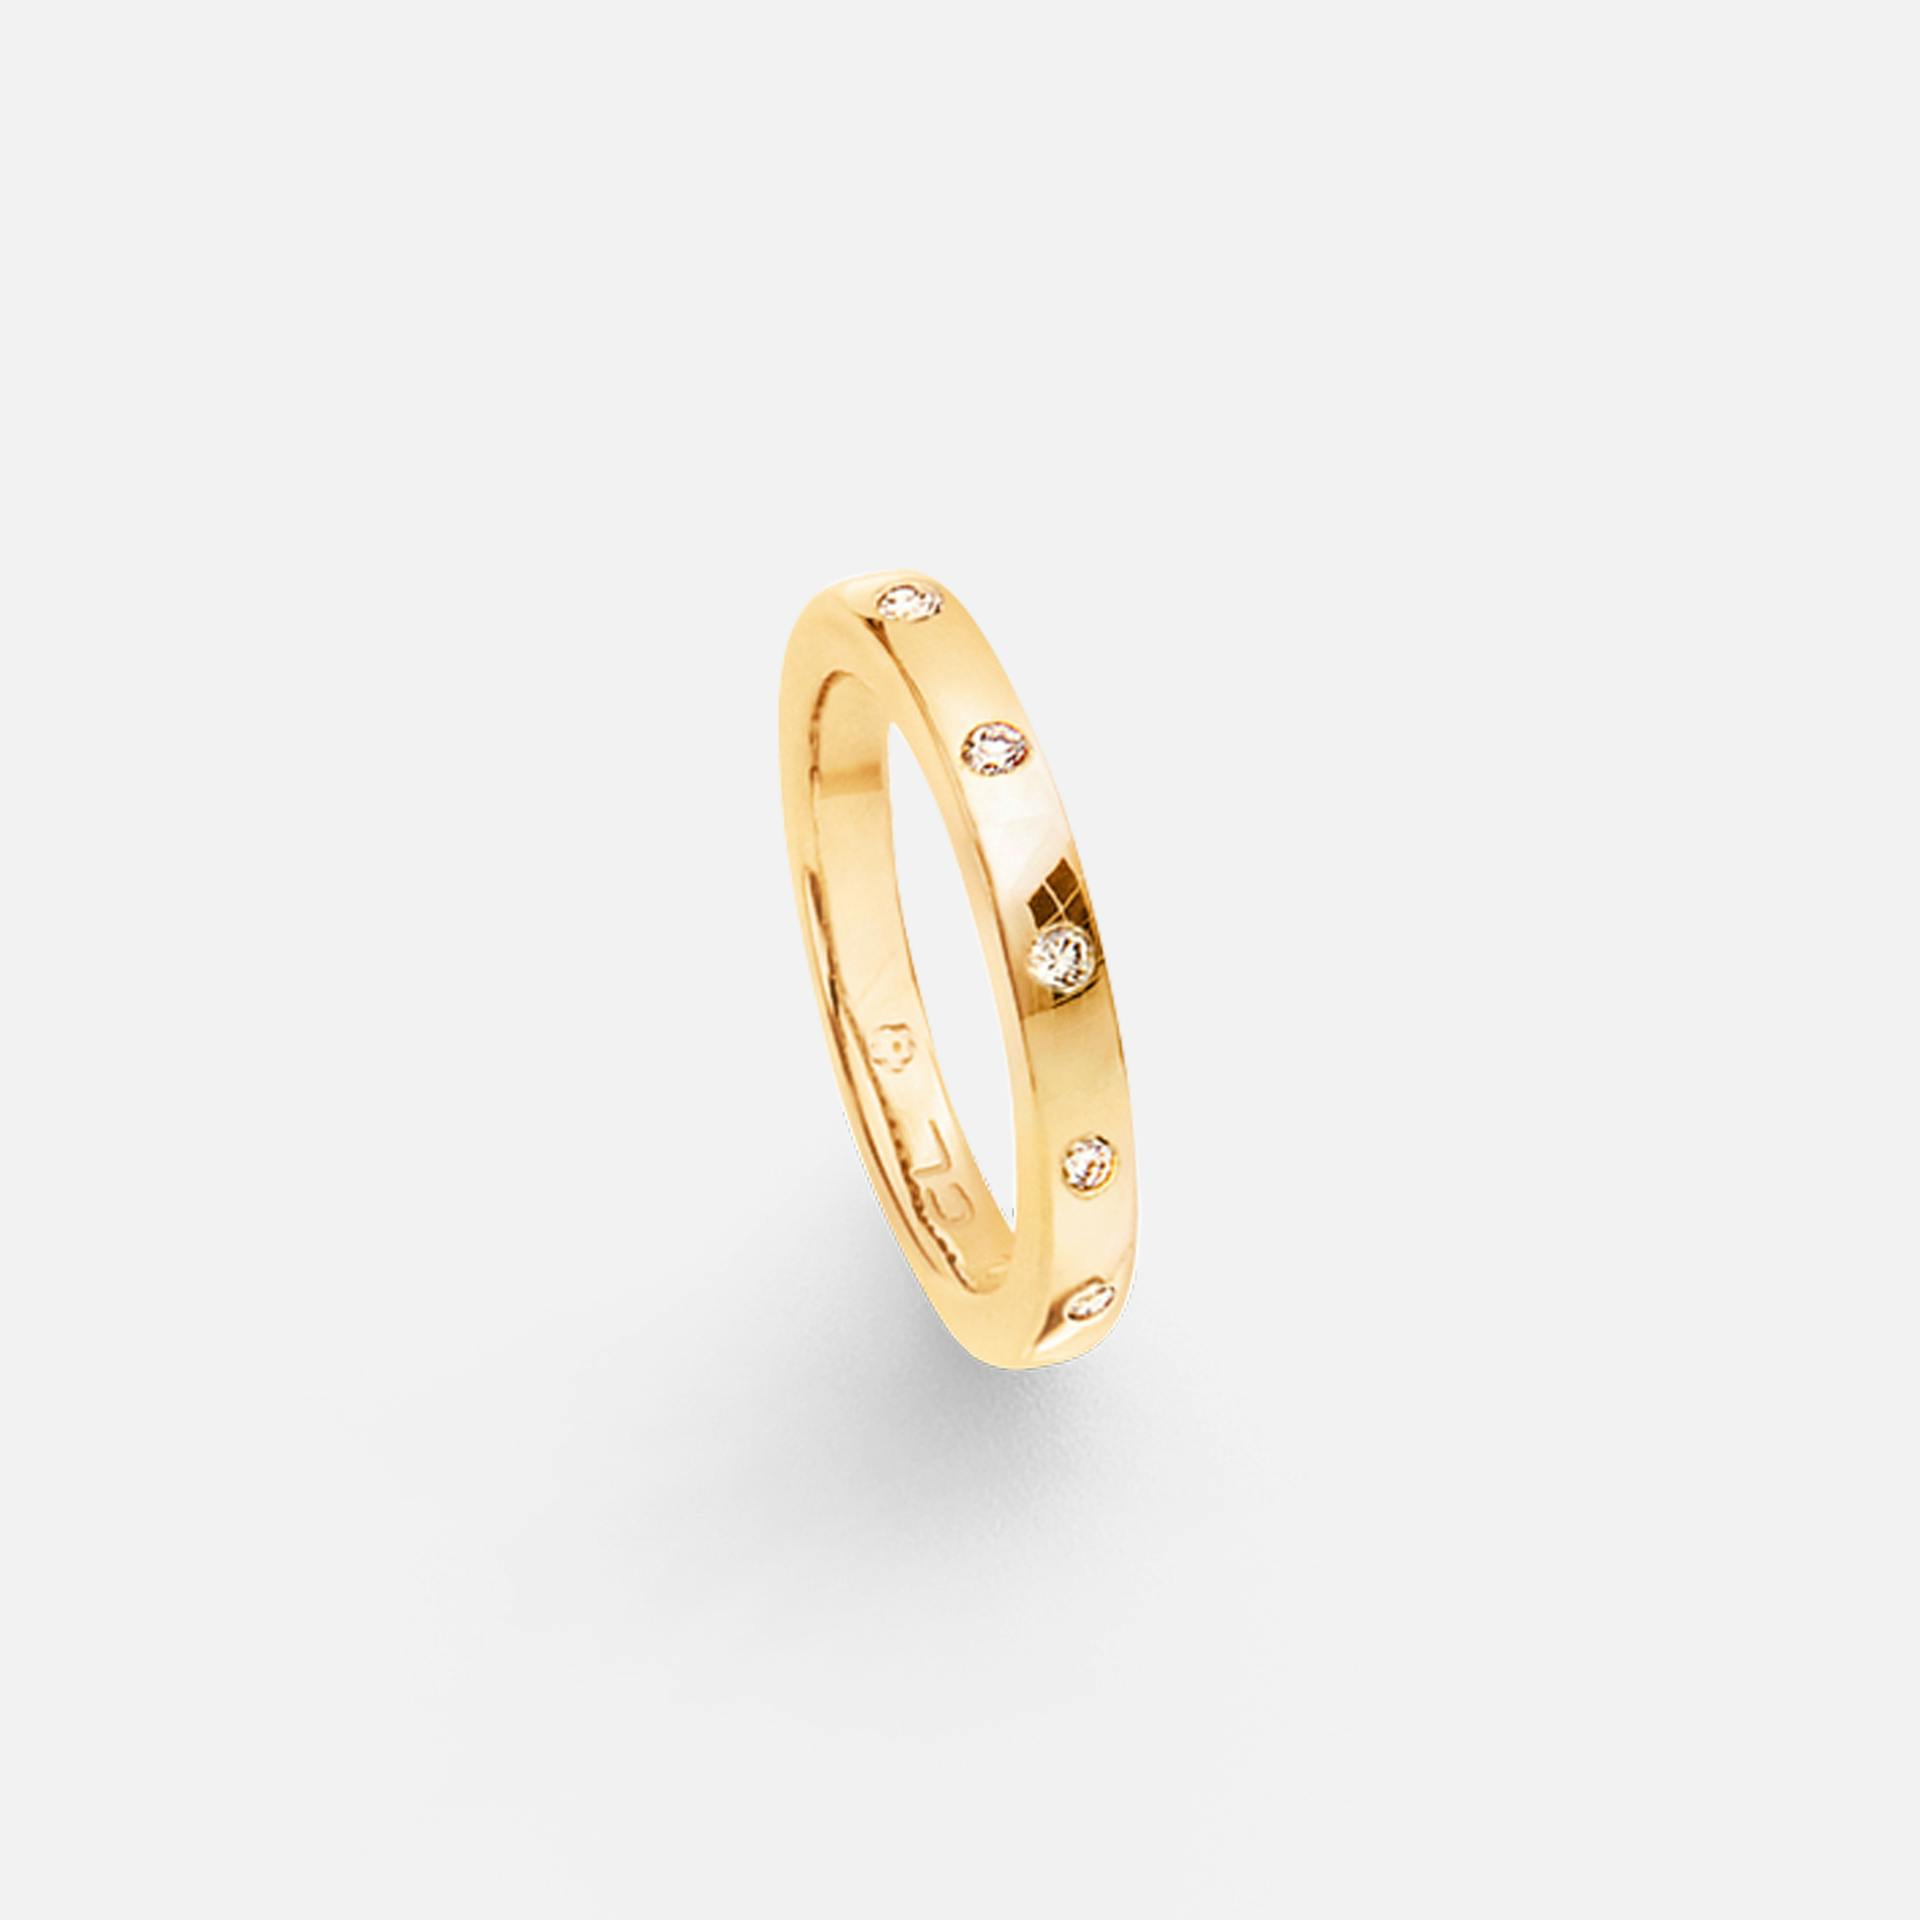 Forever Love ring 18k polished gold with diamonds 0.16 ct. TW. VS.